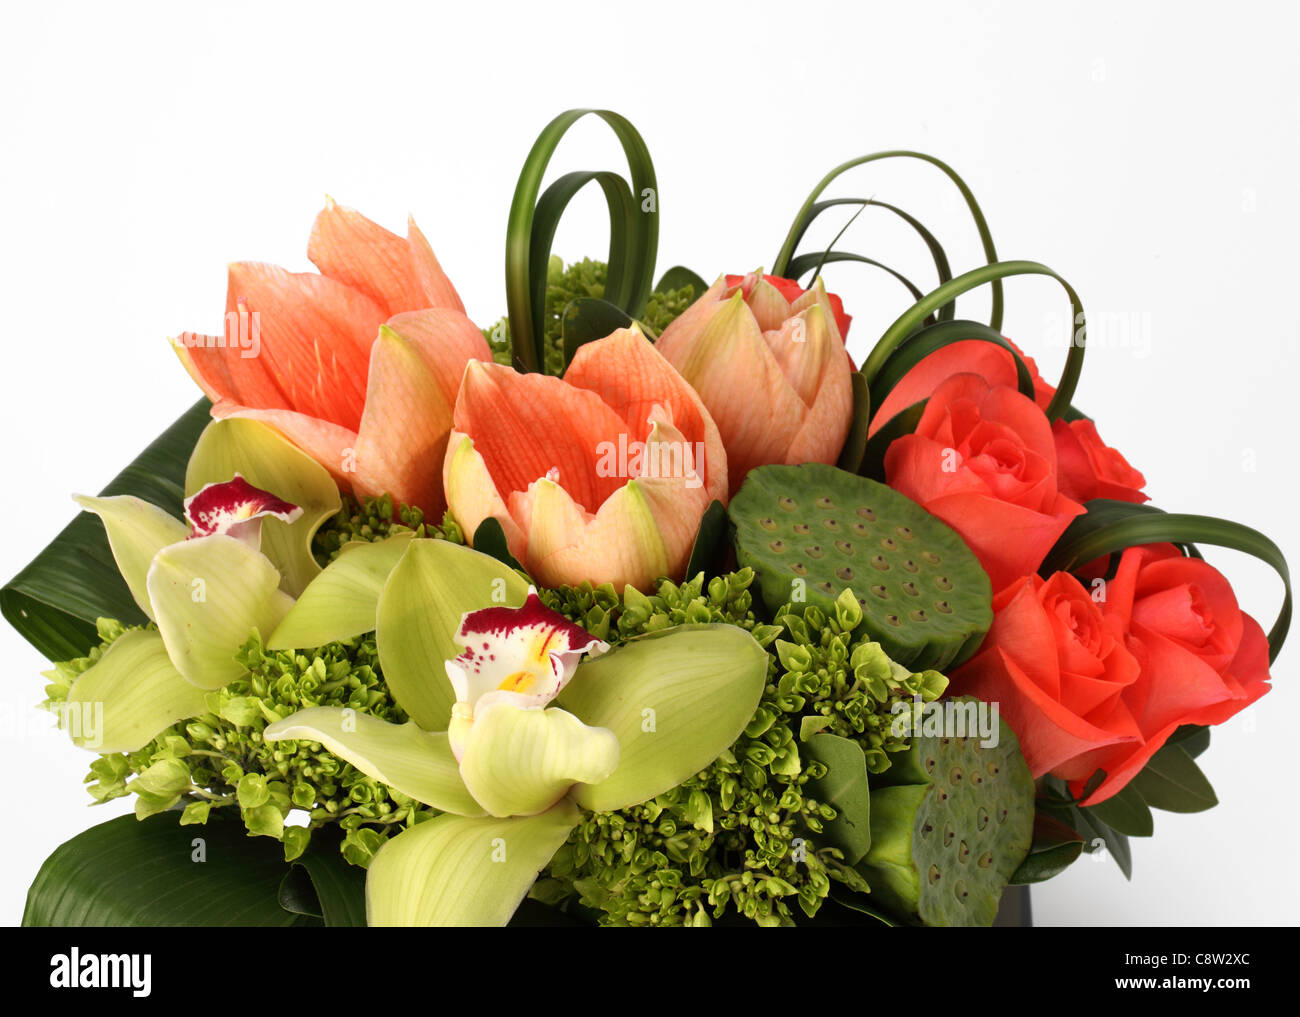 A close-up of a colorful bouquet of flowers. Orange roses, green lily seed pads, pink tulips, cymbidium orchids Stock Photo